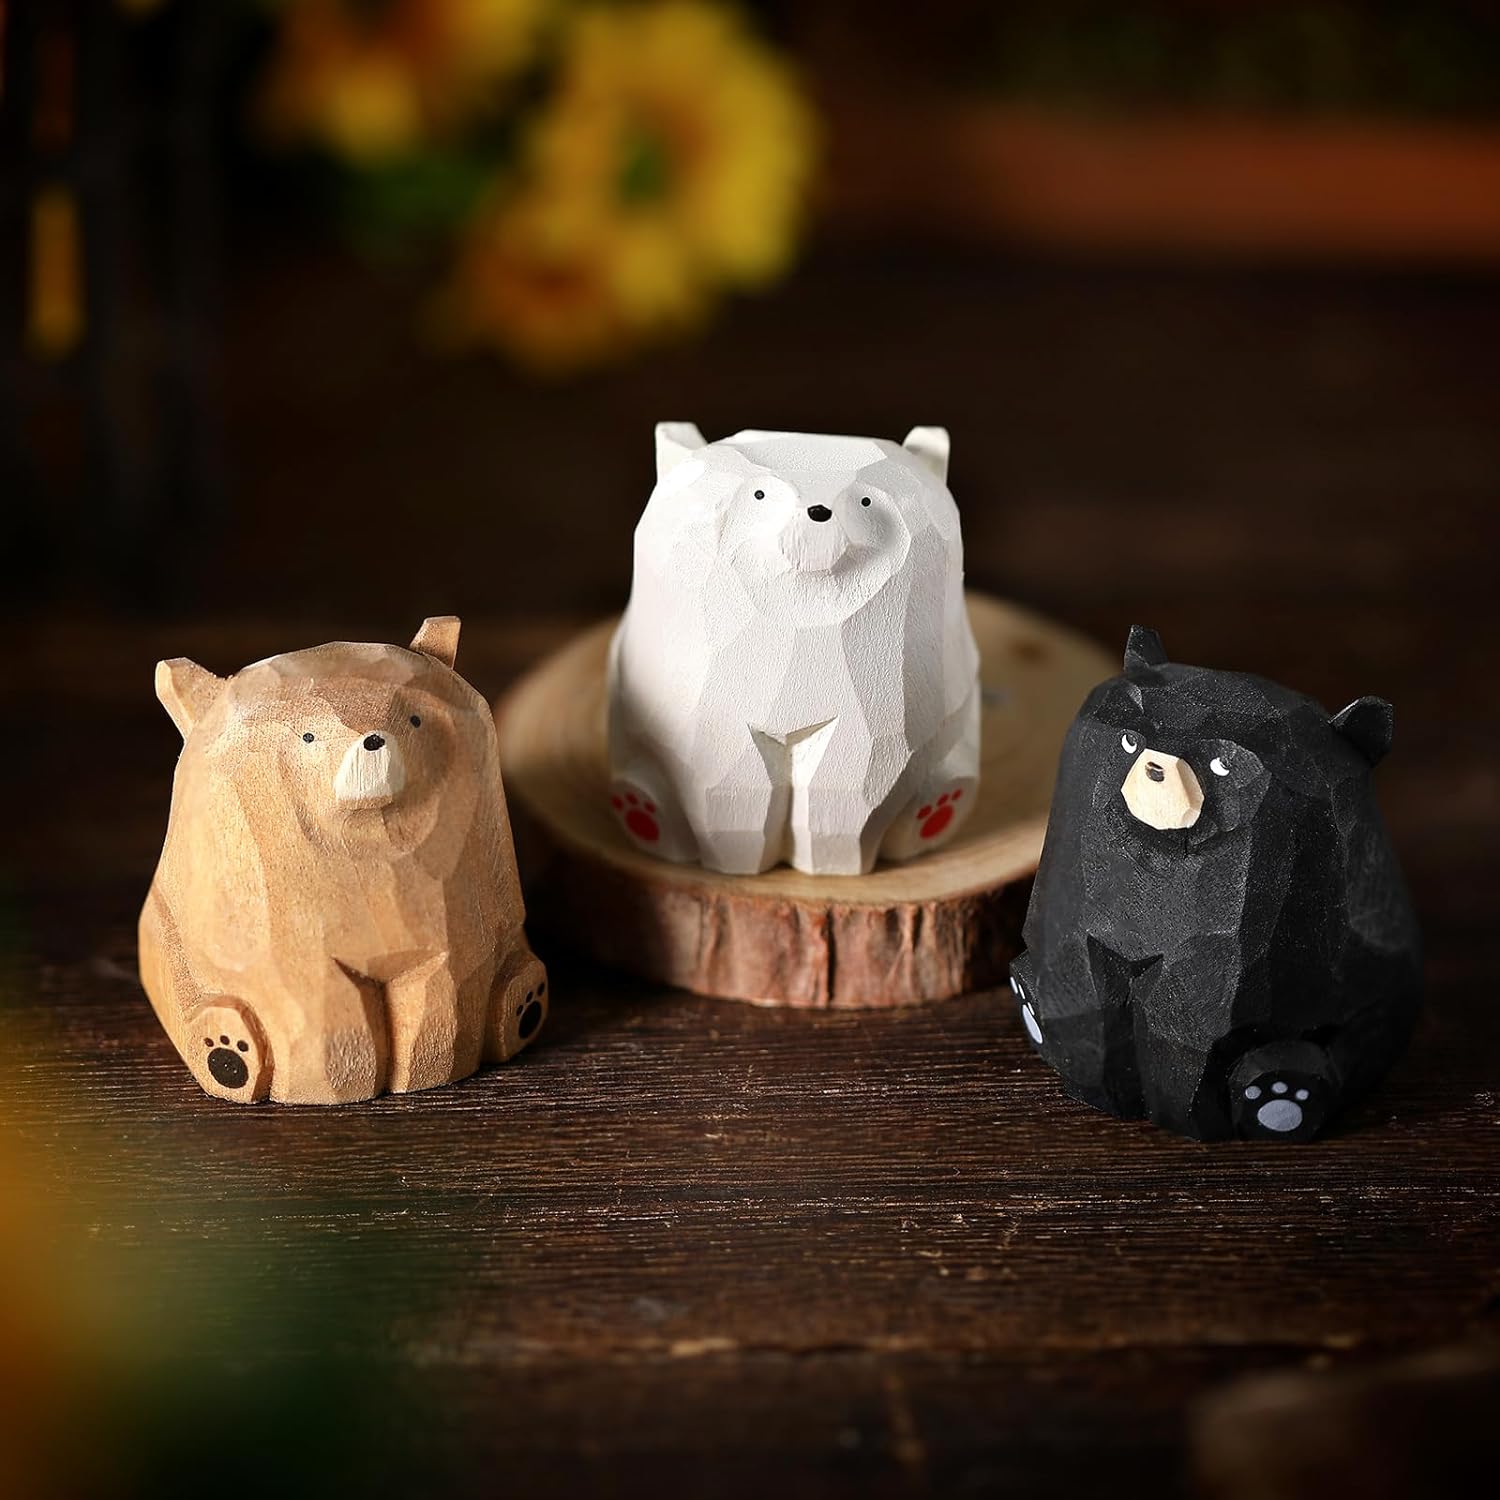 Handmade miniature fun wooden bear statues and other cute little animals (limited time discount)